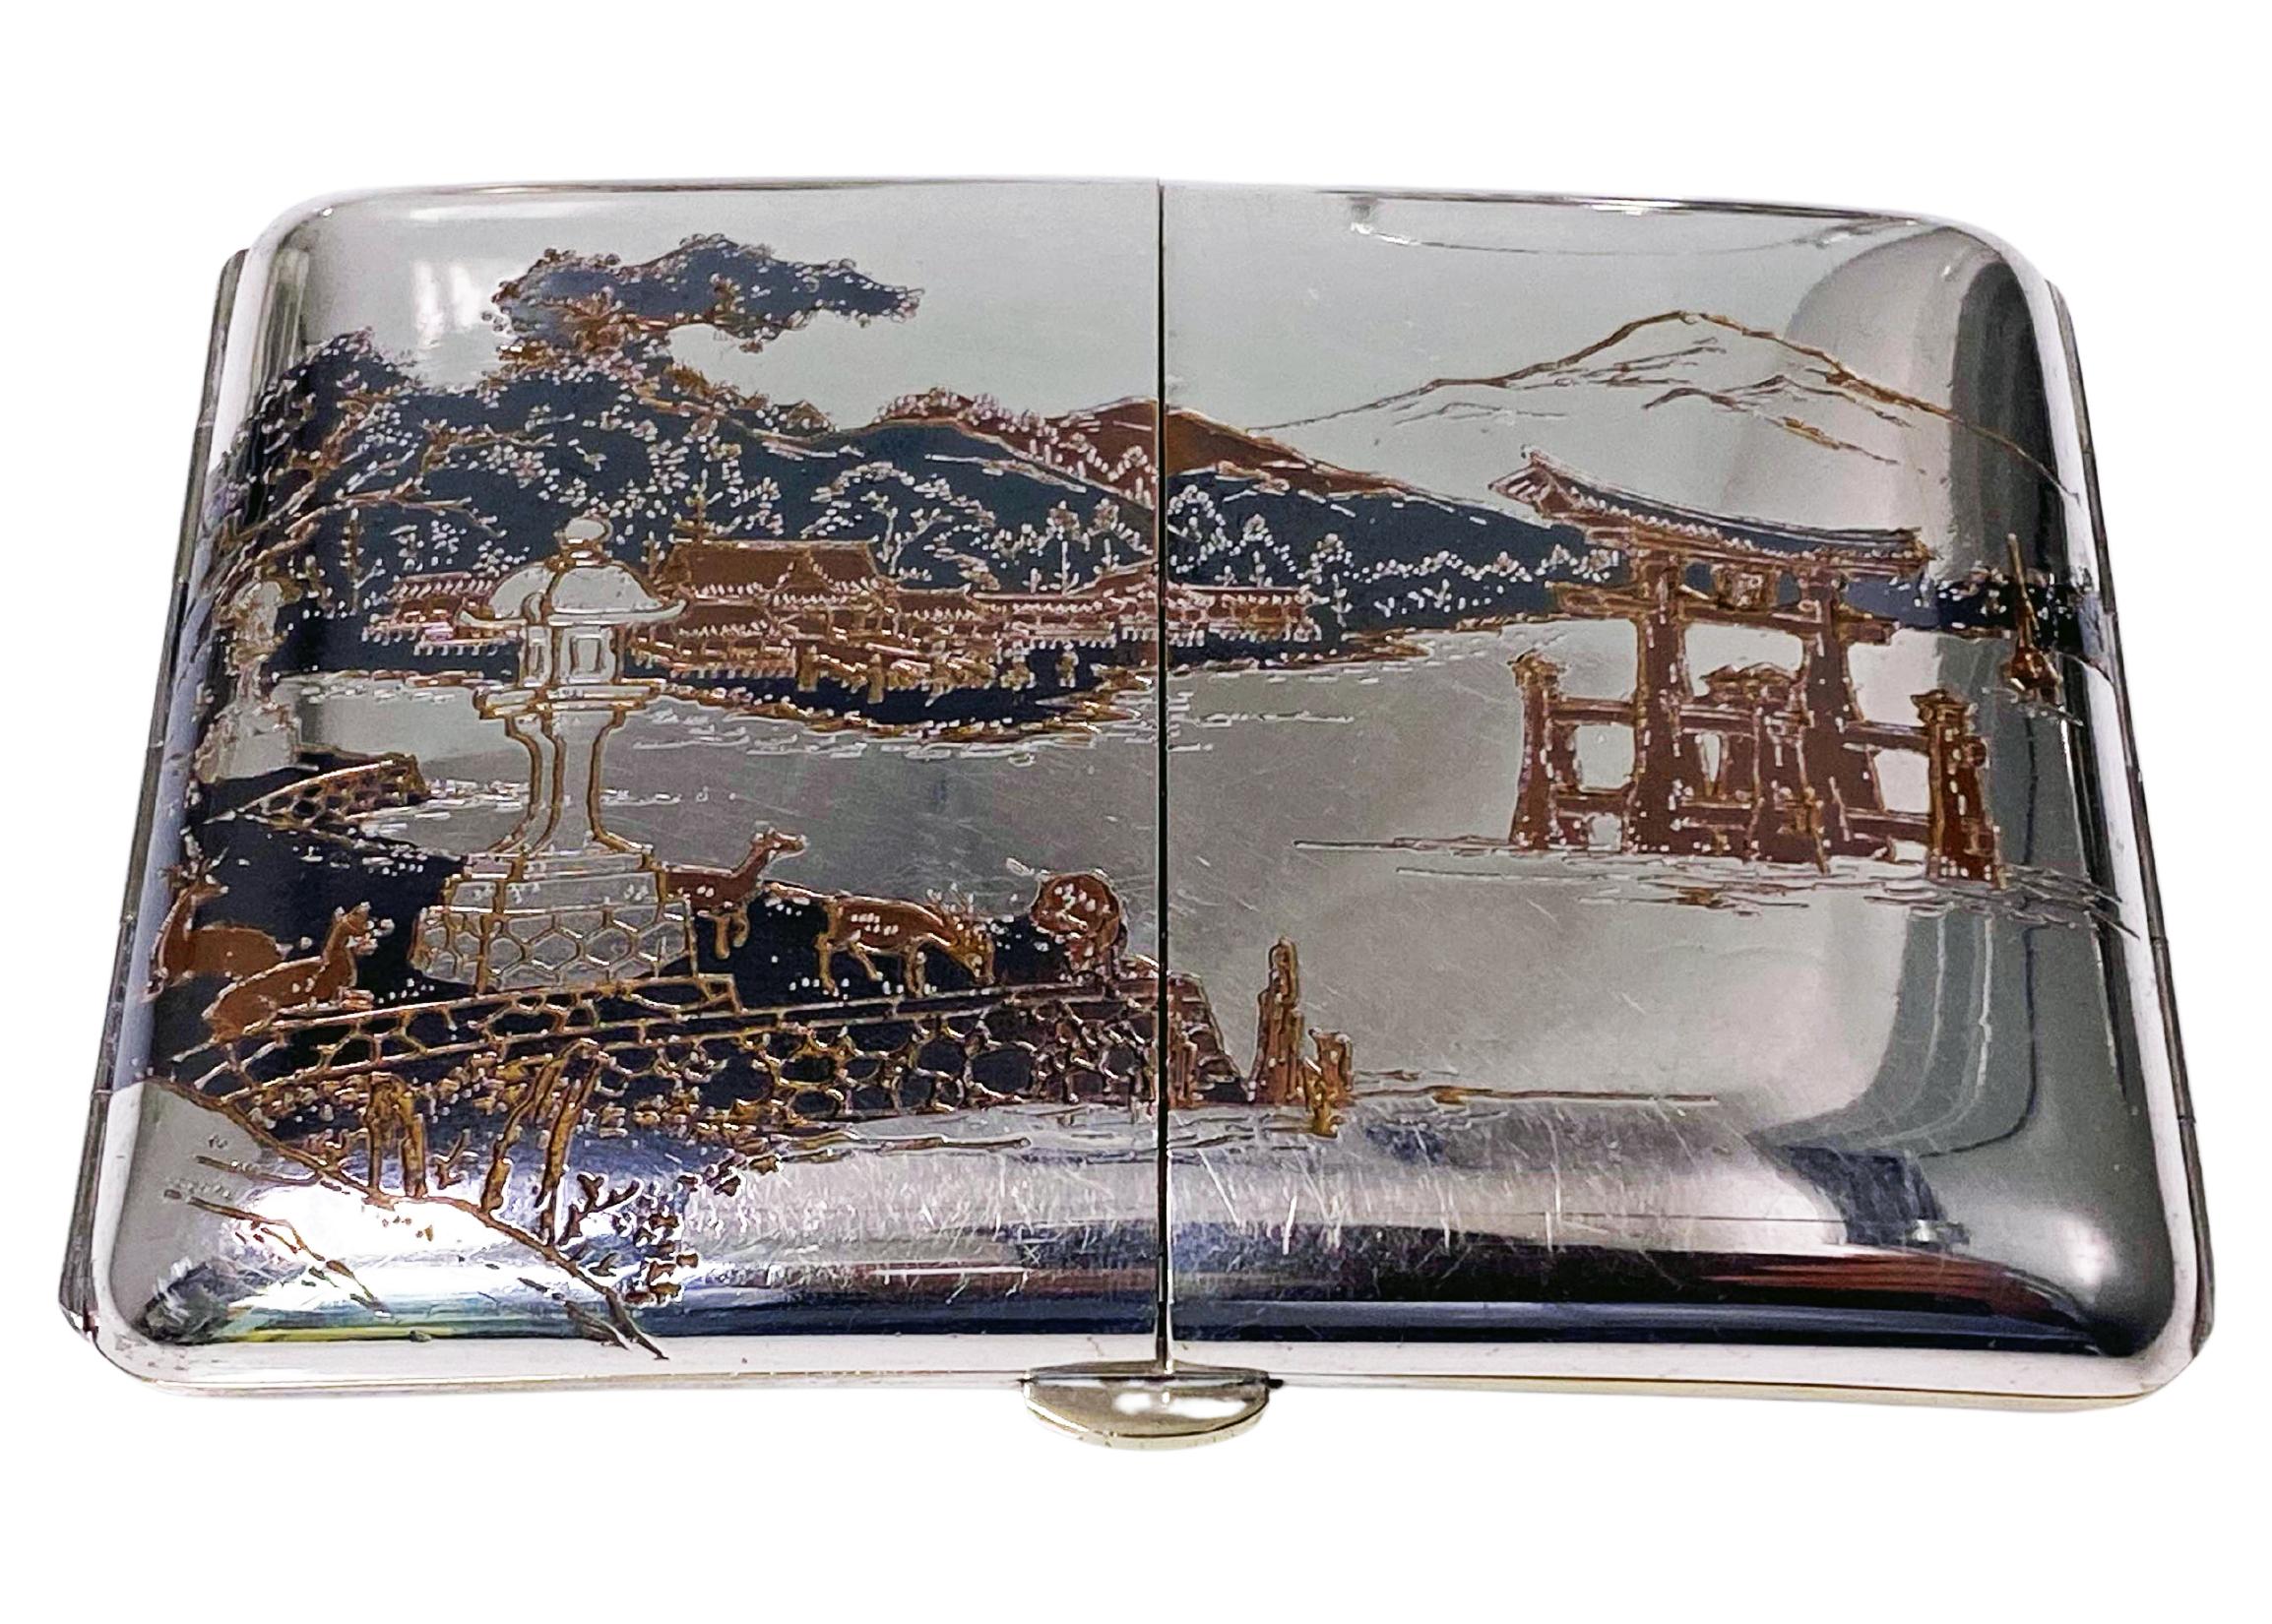 Japanese Sterling and mixed metals unusual three sectional cigarette case, C. 1920. Opens from the center to reveal stunning mixed metal scenes of Mountains (Mount Misen), Pagodas, Itsukushima Shrine and Otorii Gate, the Seto Inland Sea, Boats,